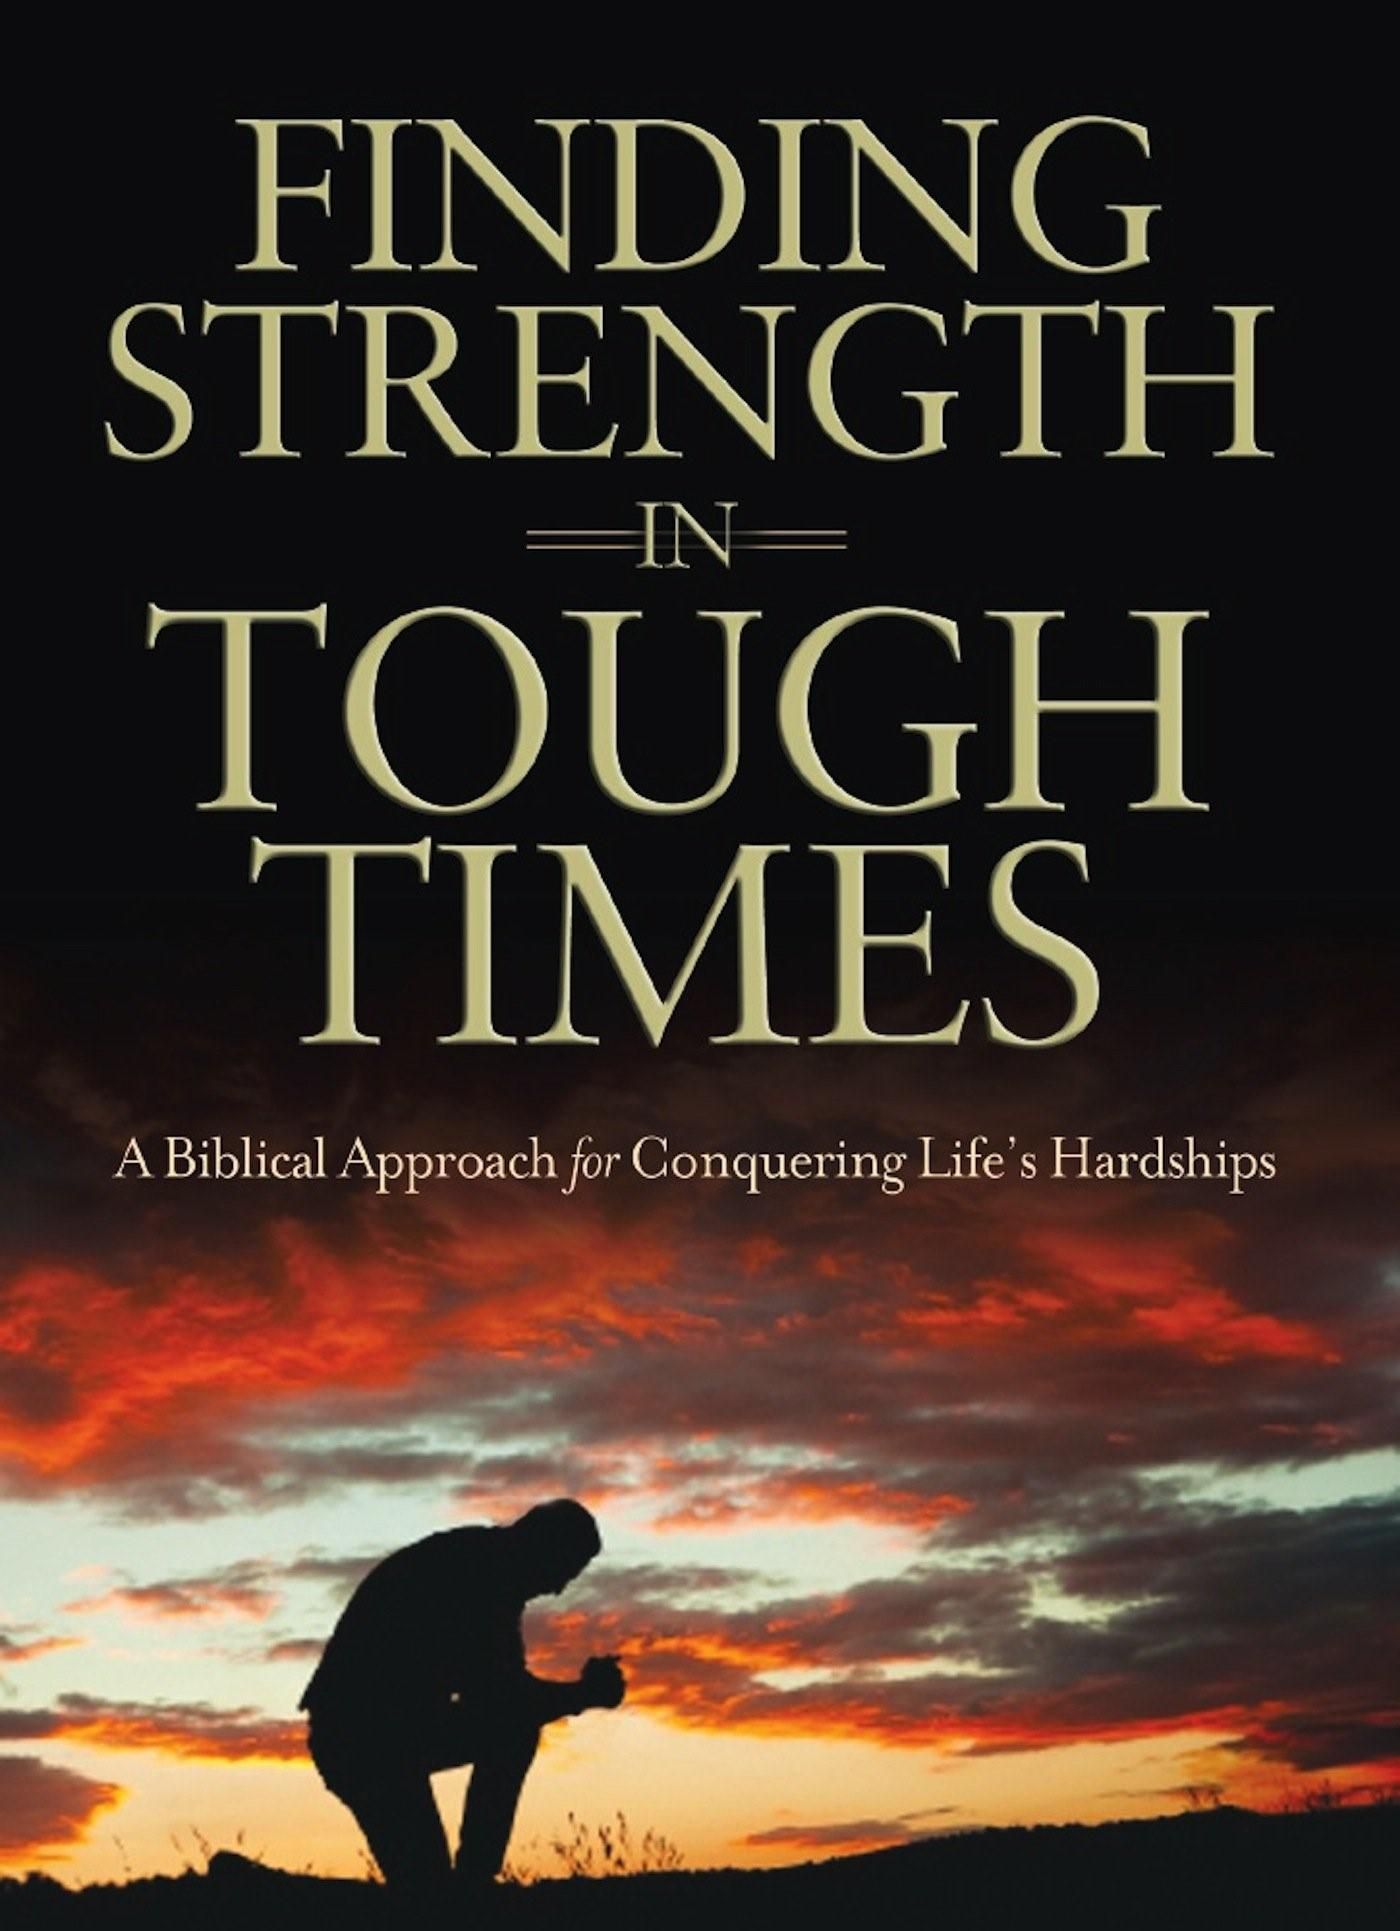 Quotes About Strength in Hard Times